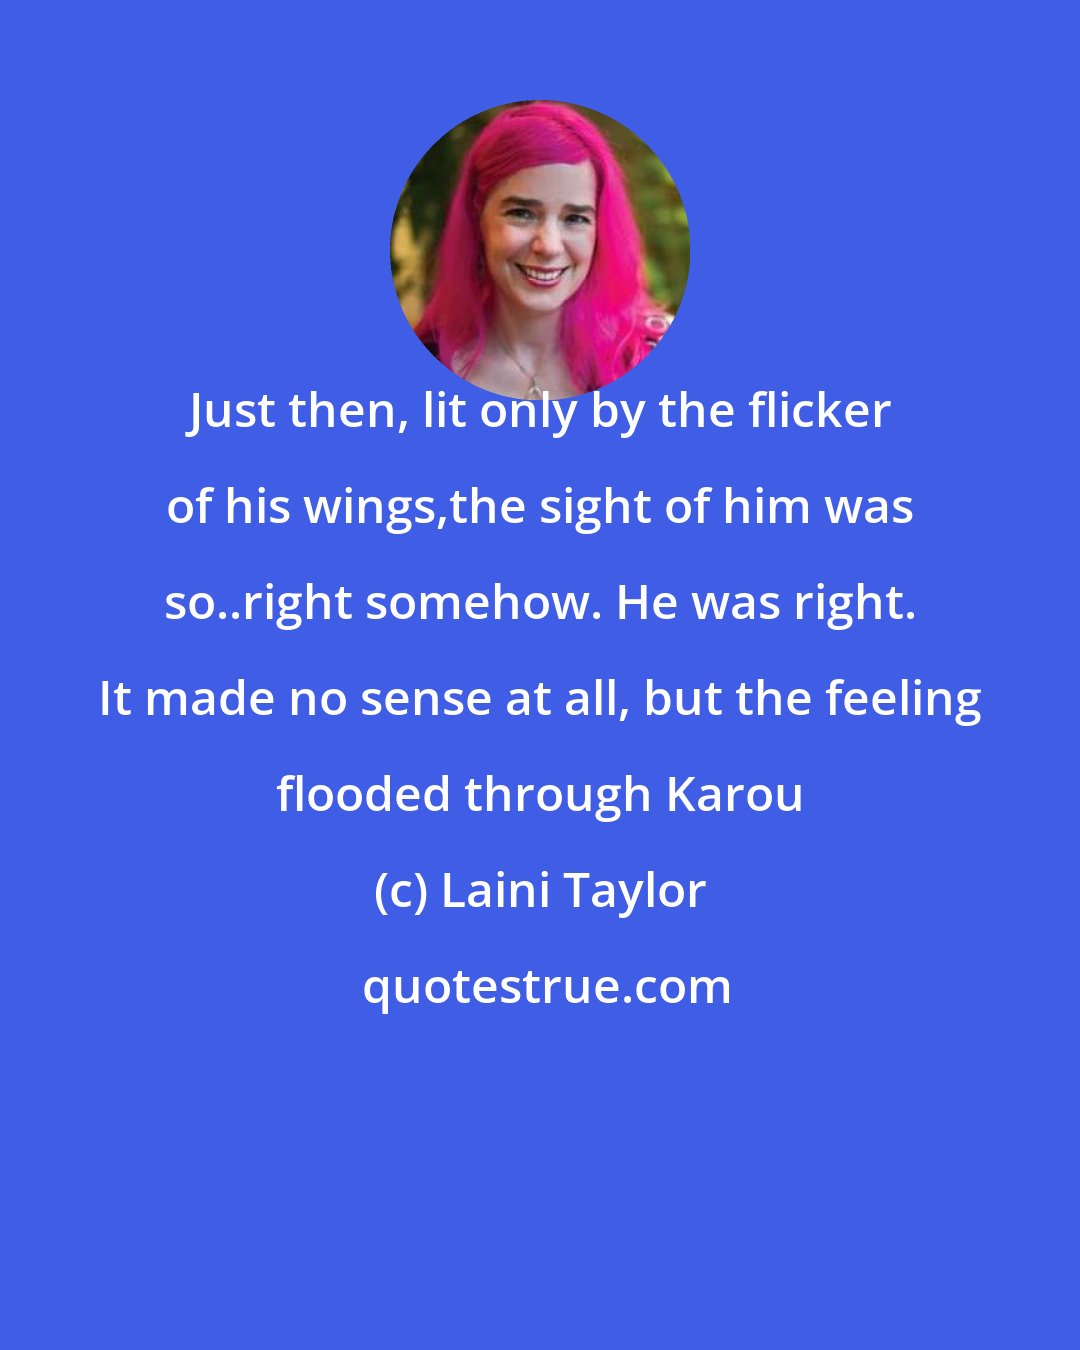 Laini Taylor: Just then, lit only by the flicker of his wings,the sight of him was so..right somehow. He was right. It made no sense at all, but the feeling flooded through Karou